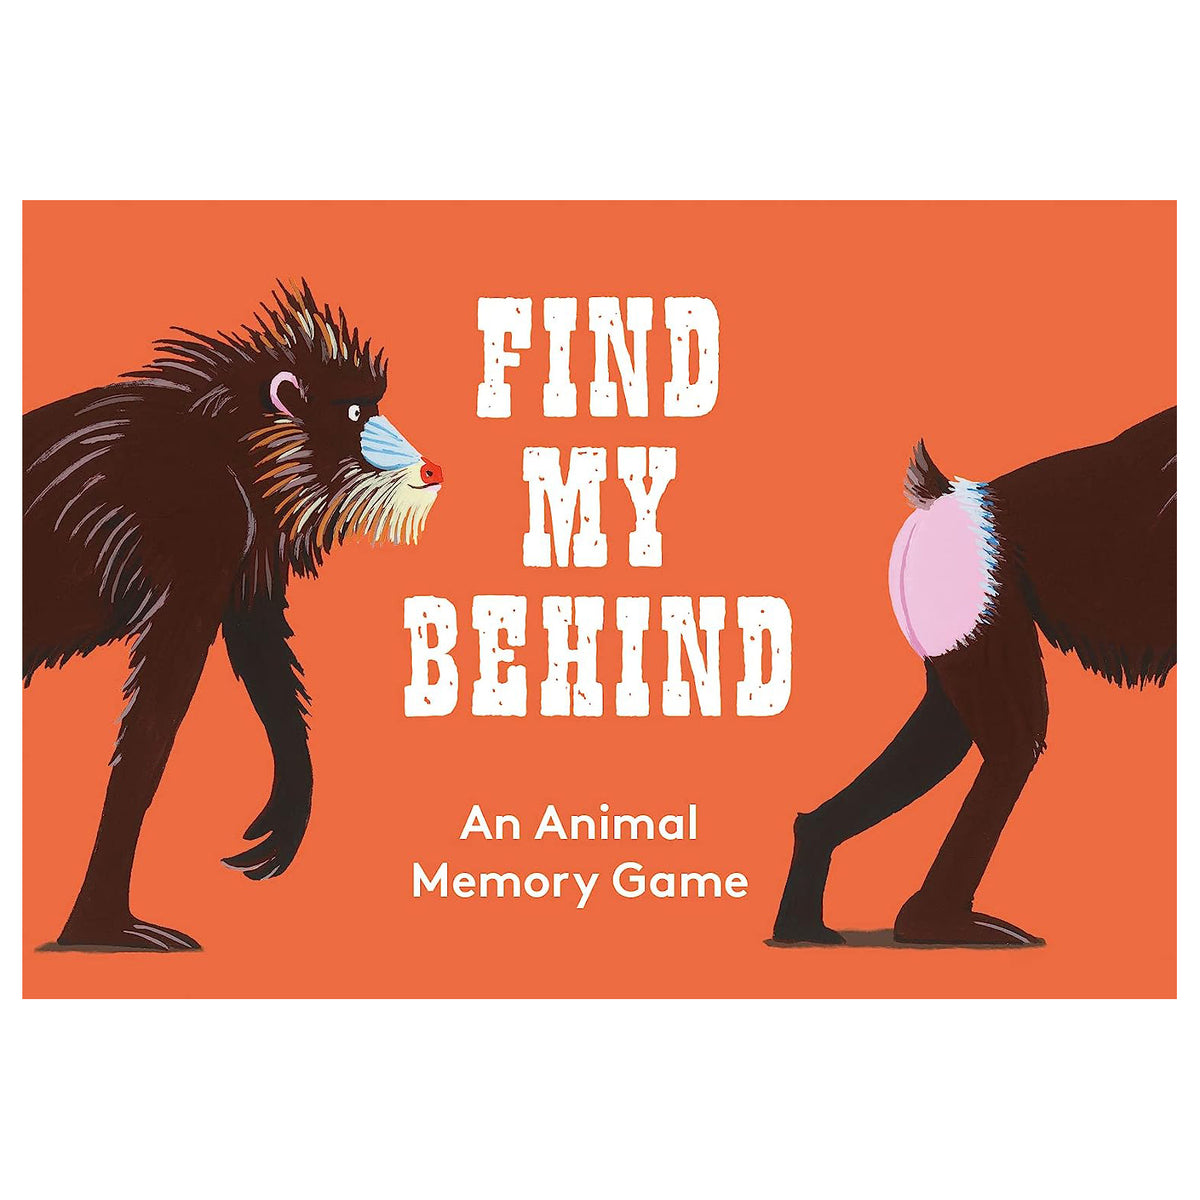 Find My Behind An Animal Memory Game